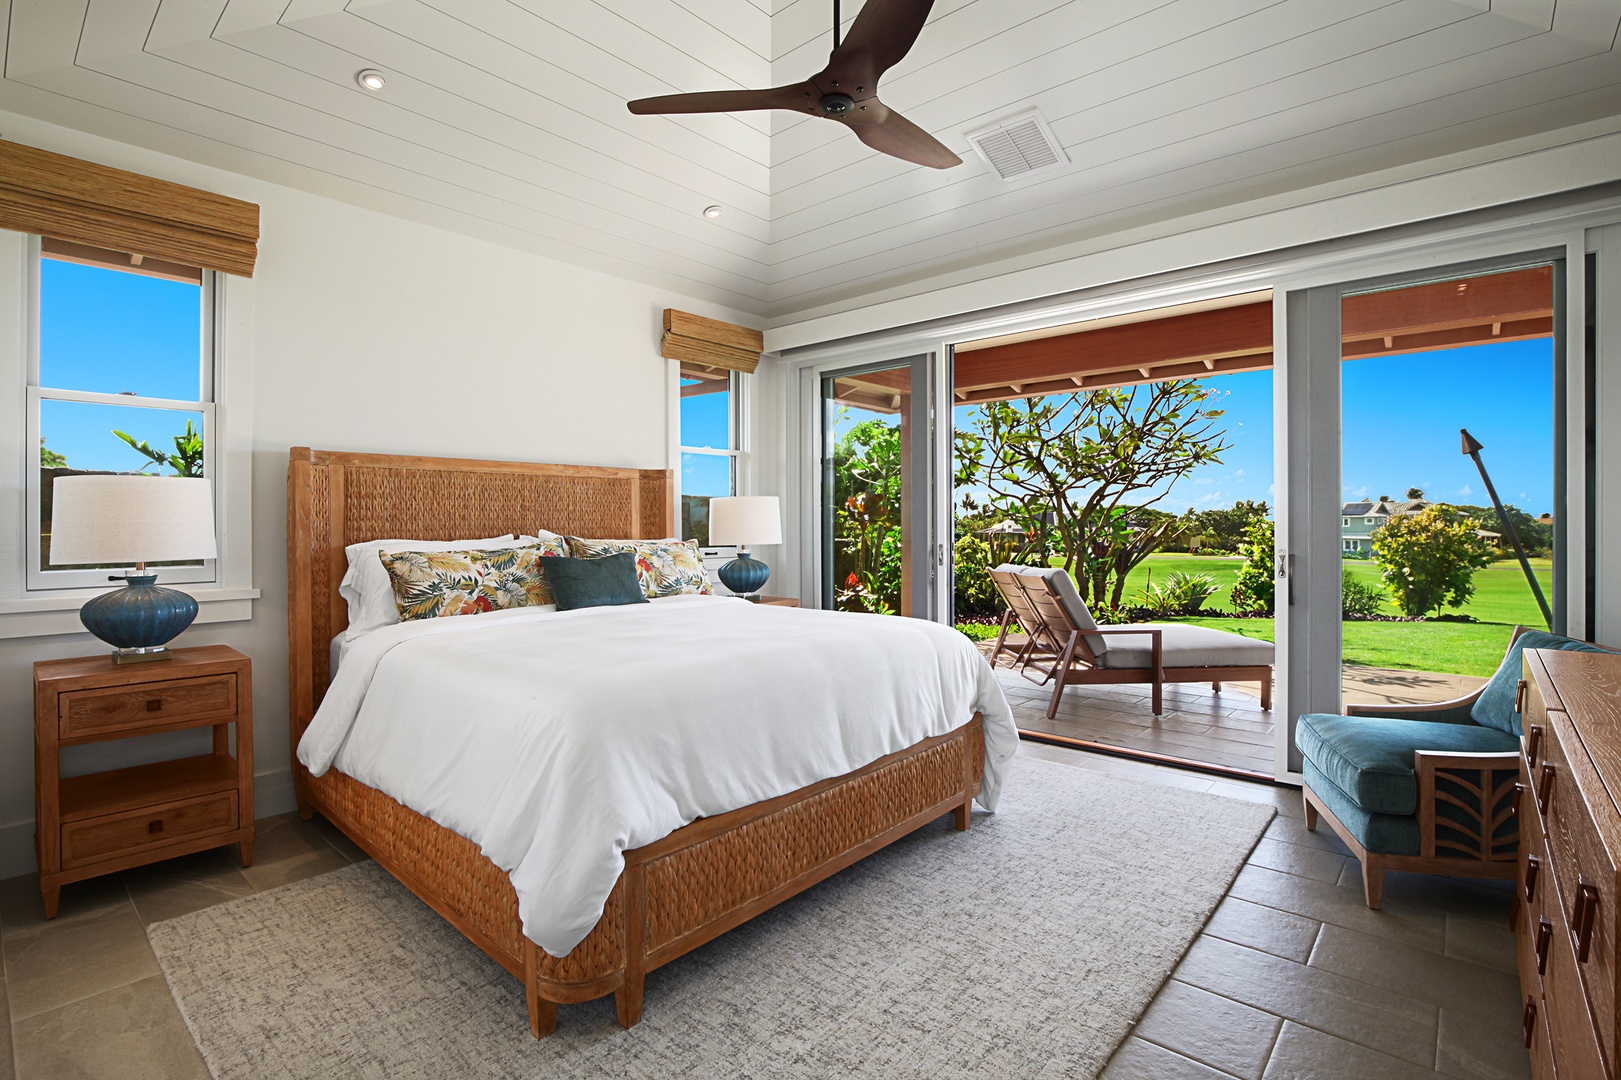 Koloa Vacation Rentals, OFB Hale Mala Ulu - Primary bedroom with king bed Ensuite Bathroom, Golf Course View, Ocean View, what else do you need?